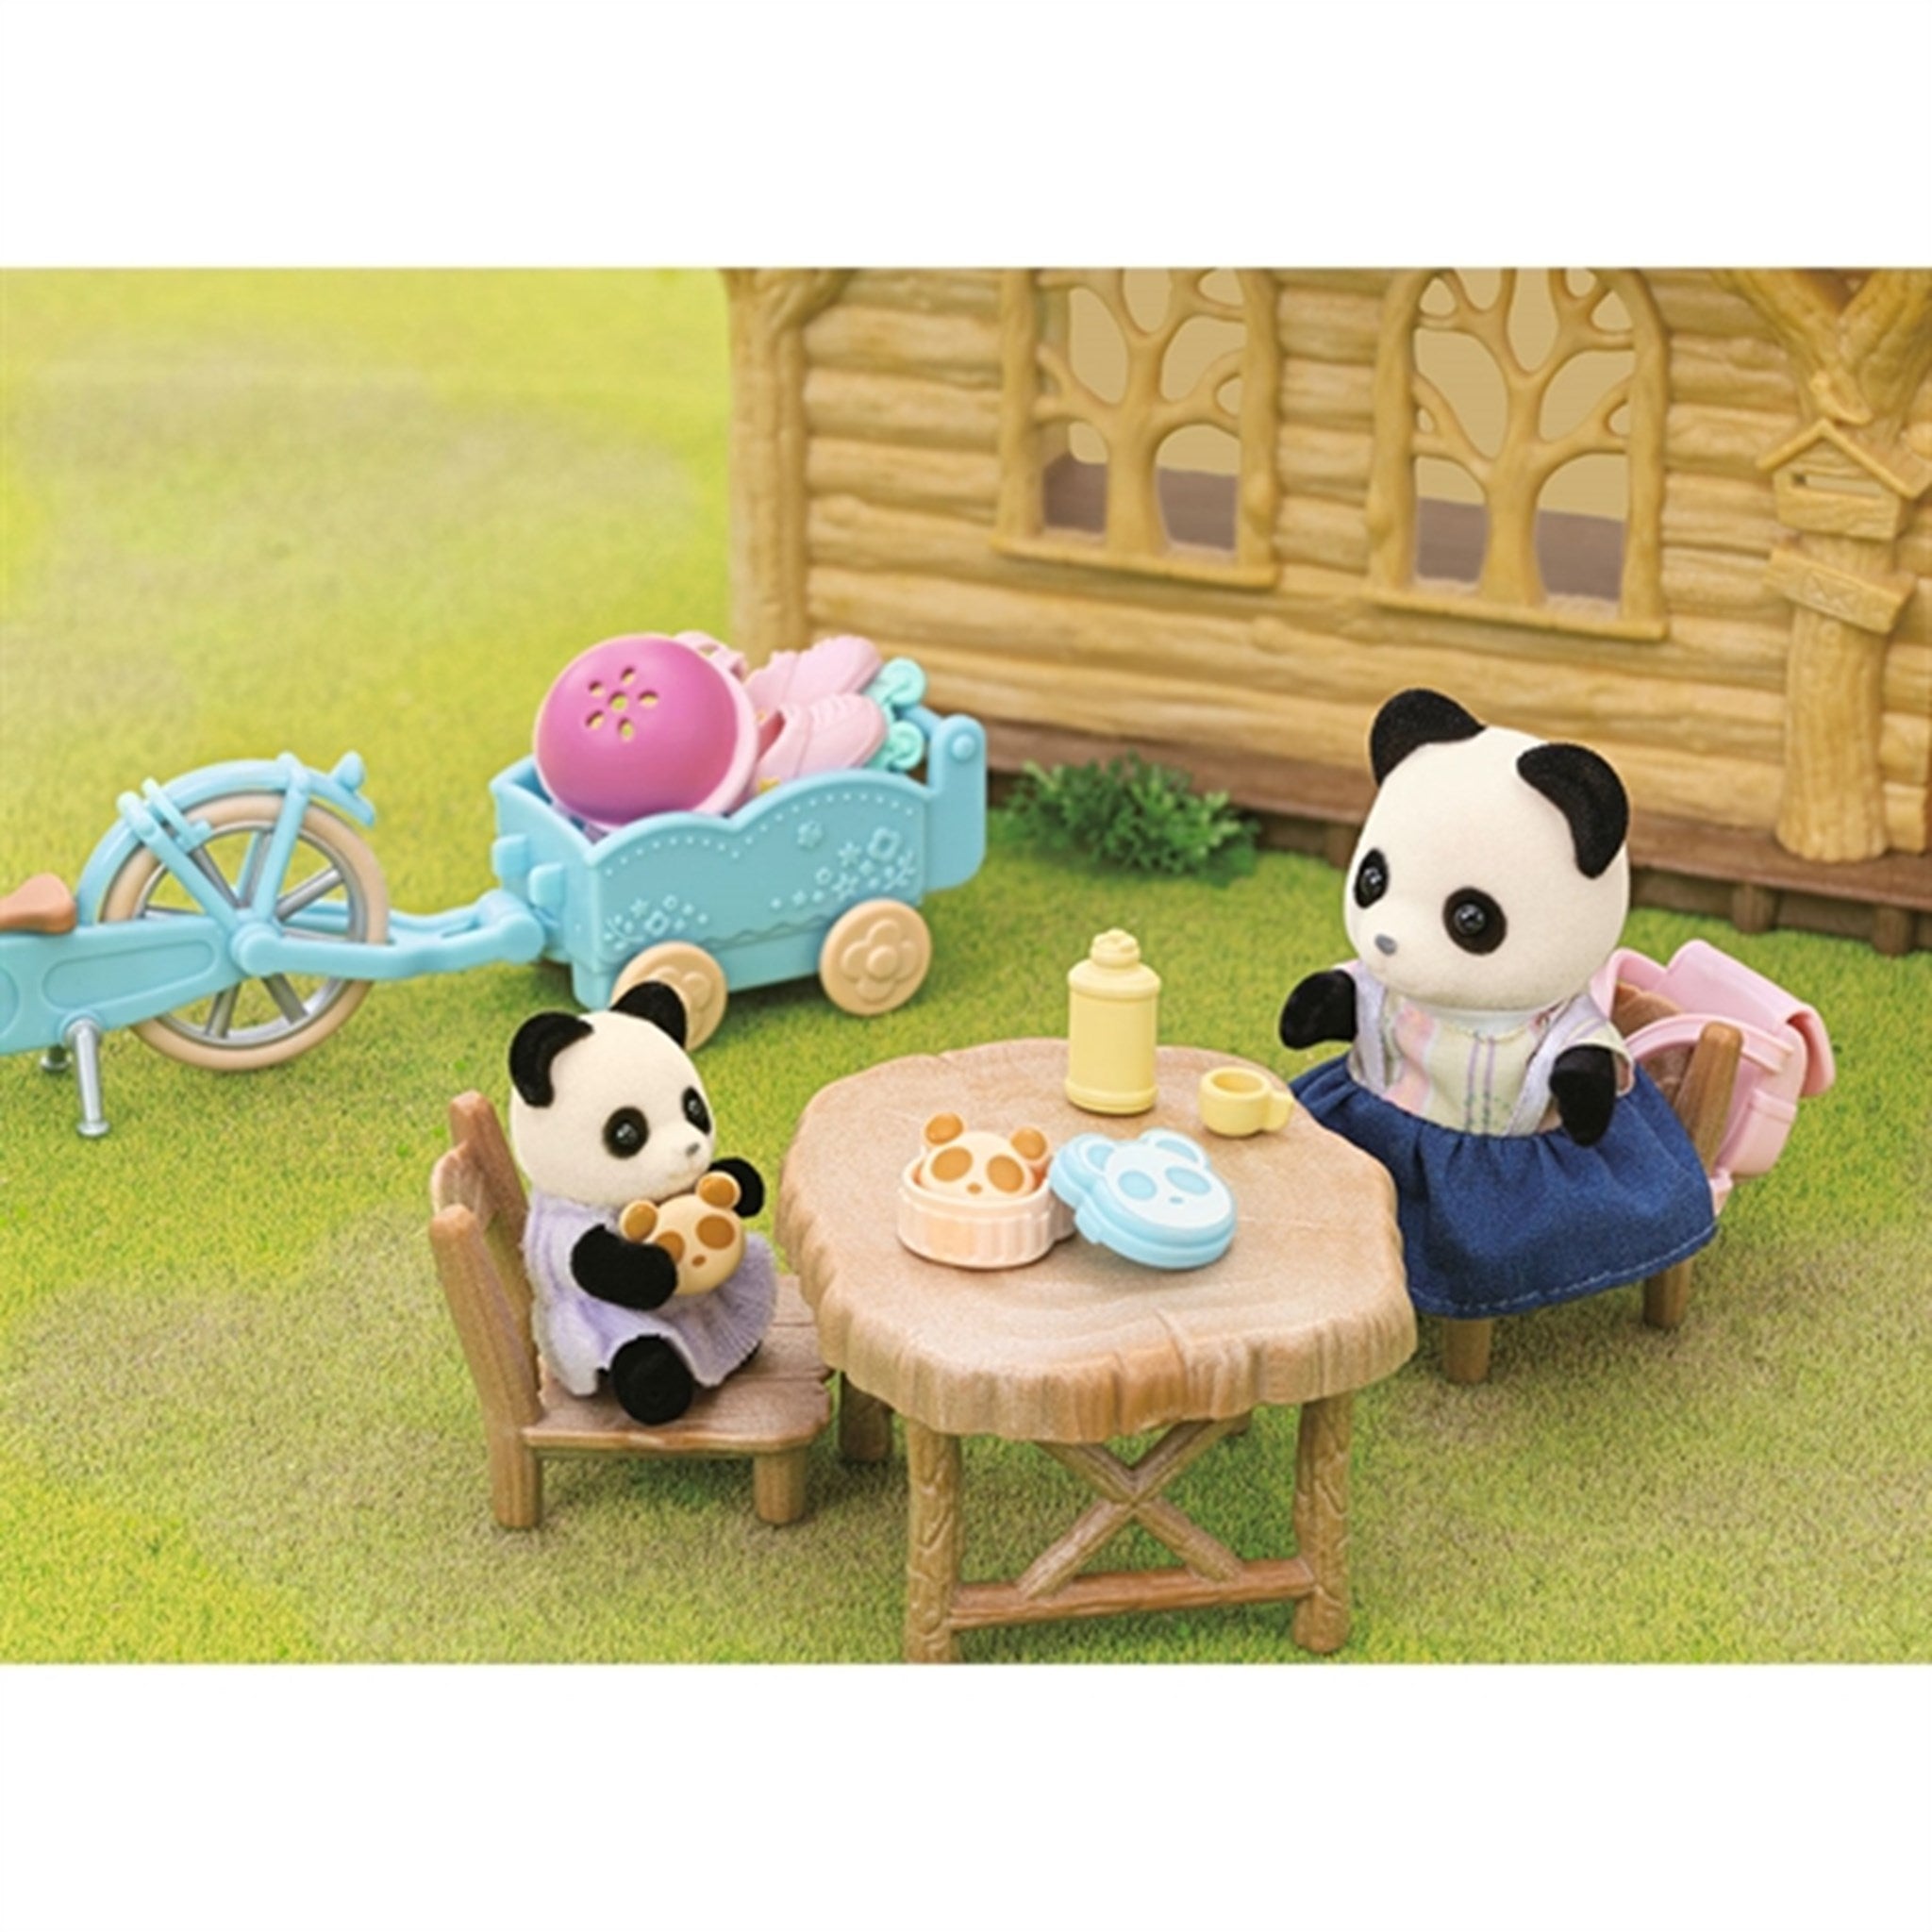 Sylvanian Families Bike and Roller Skates Set With Figure 4